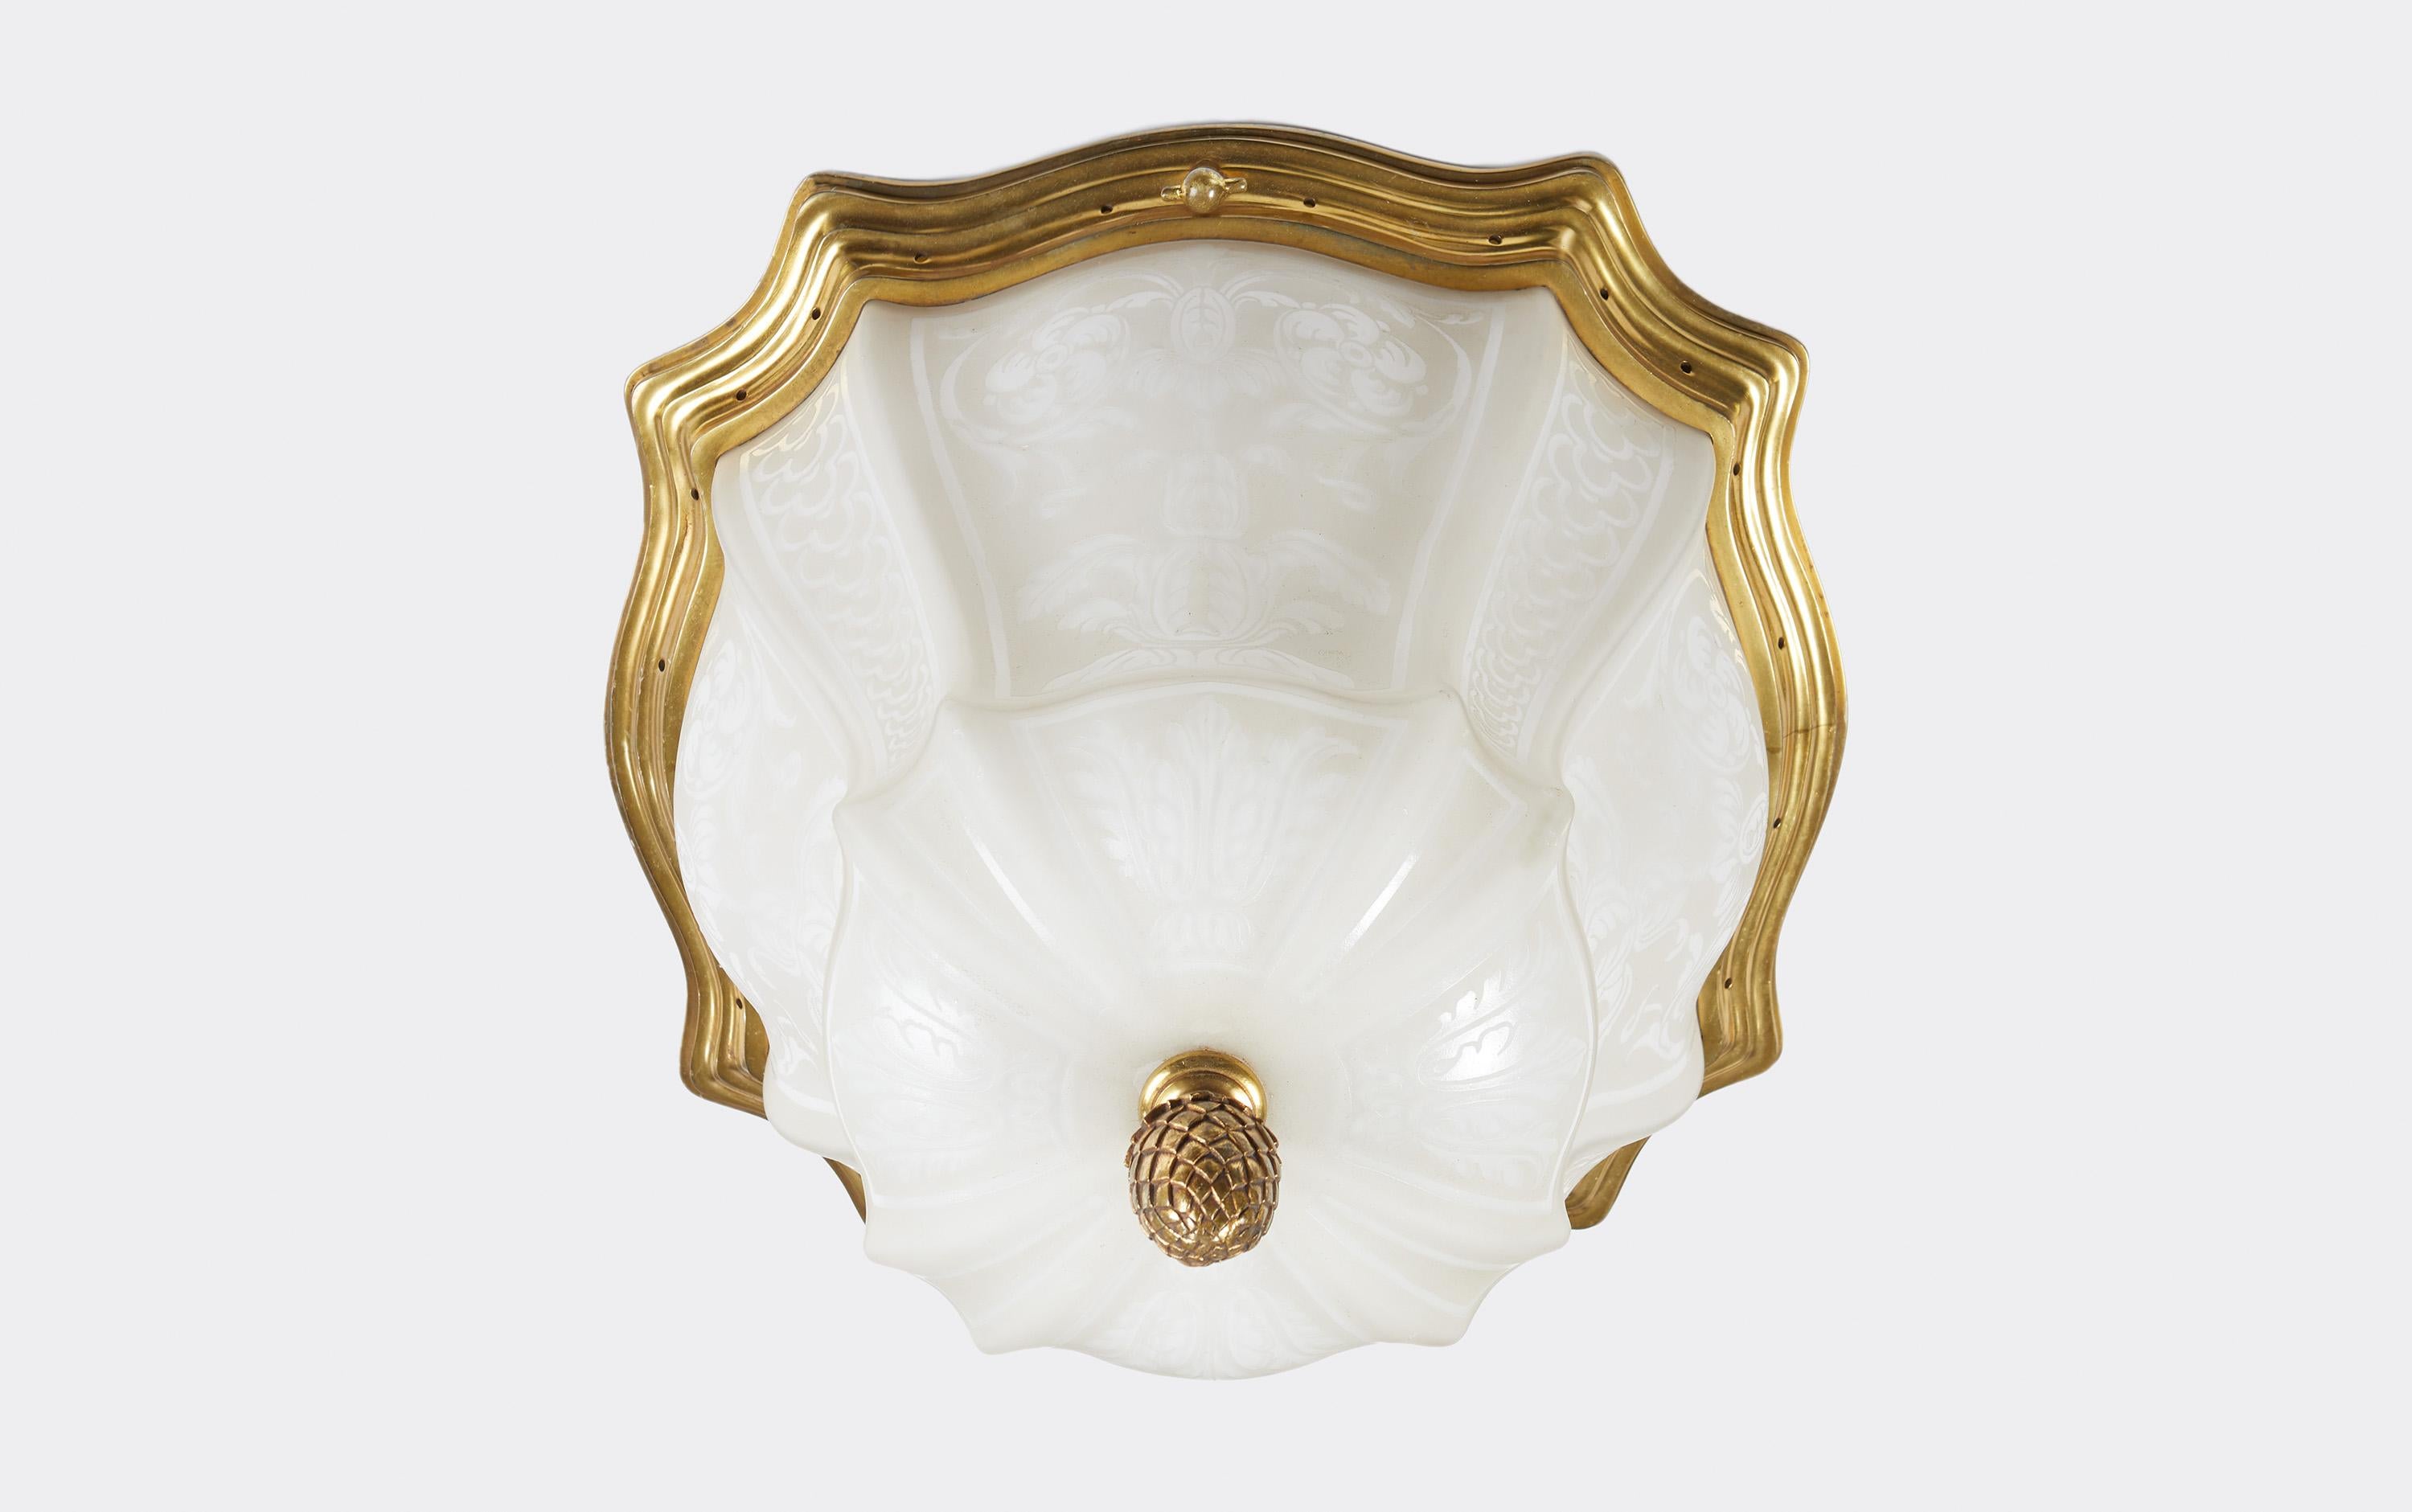 A pair of signed Caldwell flushmounted fixtures, circa 1920. The shaped cameo-style glass dome with classical motifs. With shaped gilt bronze frame and with acorn shaped finials on the underside. Signed by American maker Caldwell. A beautiful pair